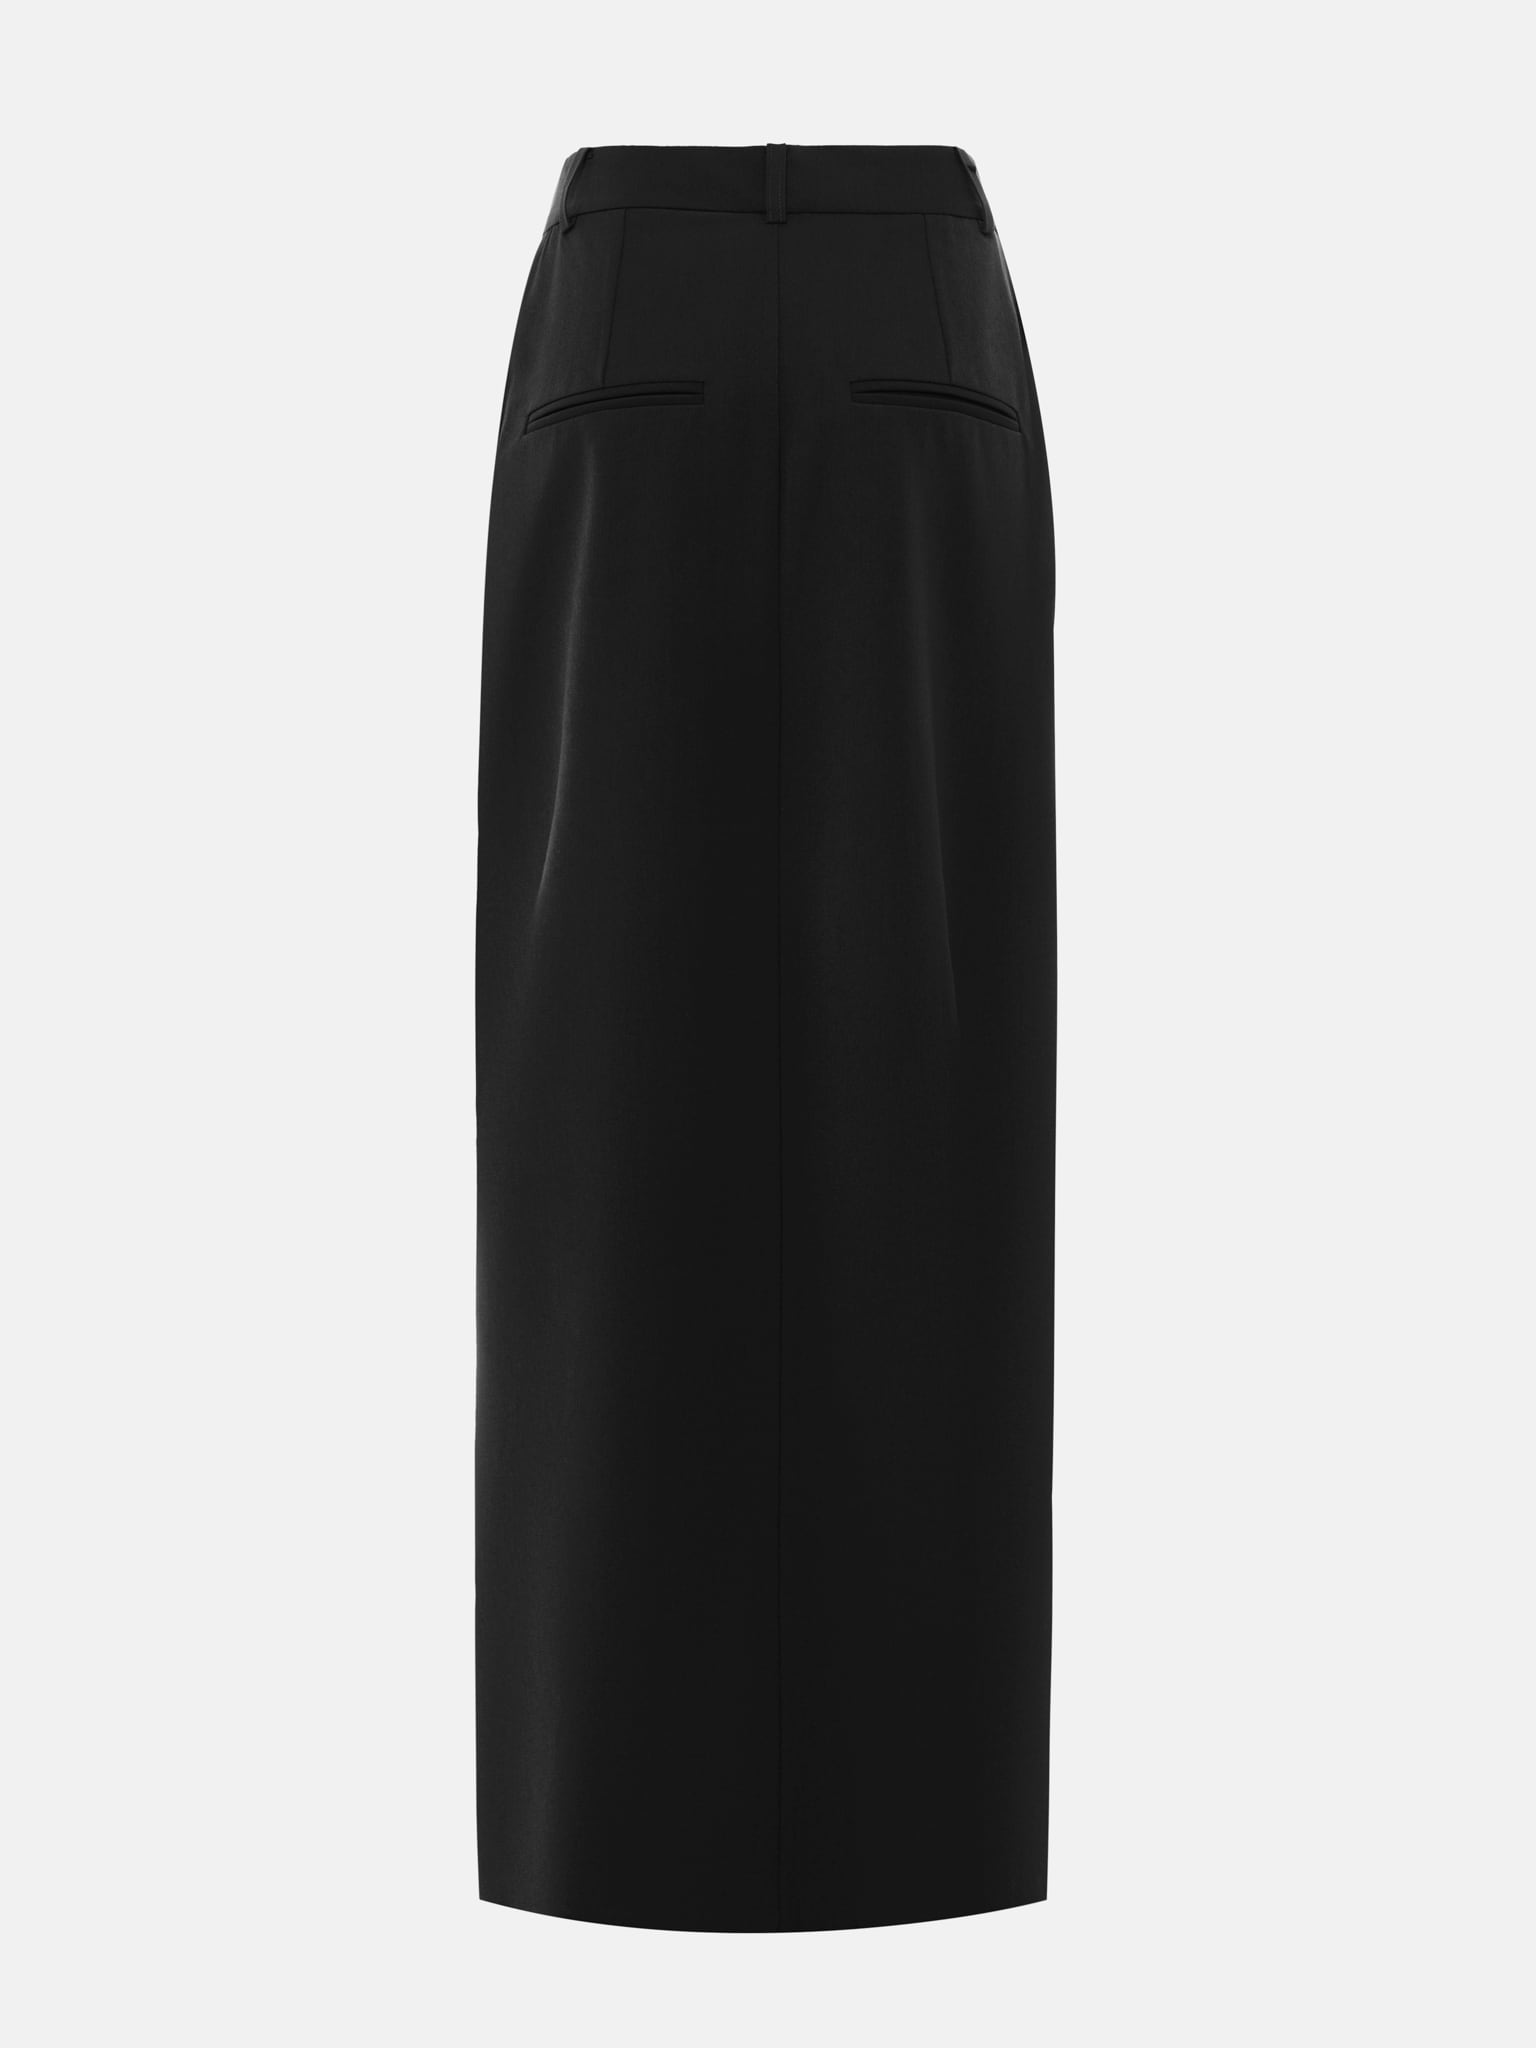 Maxi skirt with a front slit from suiting fabric